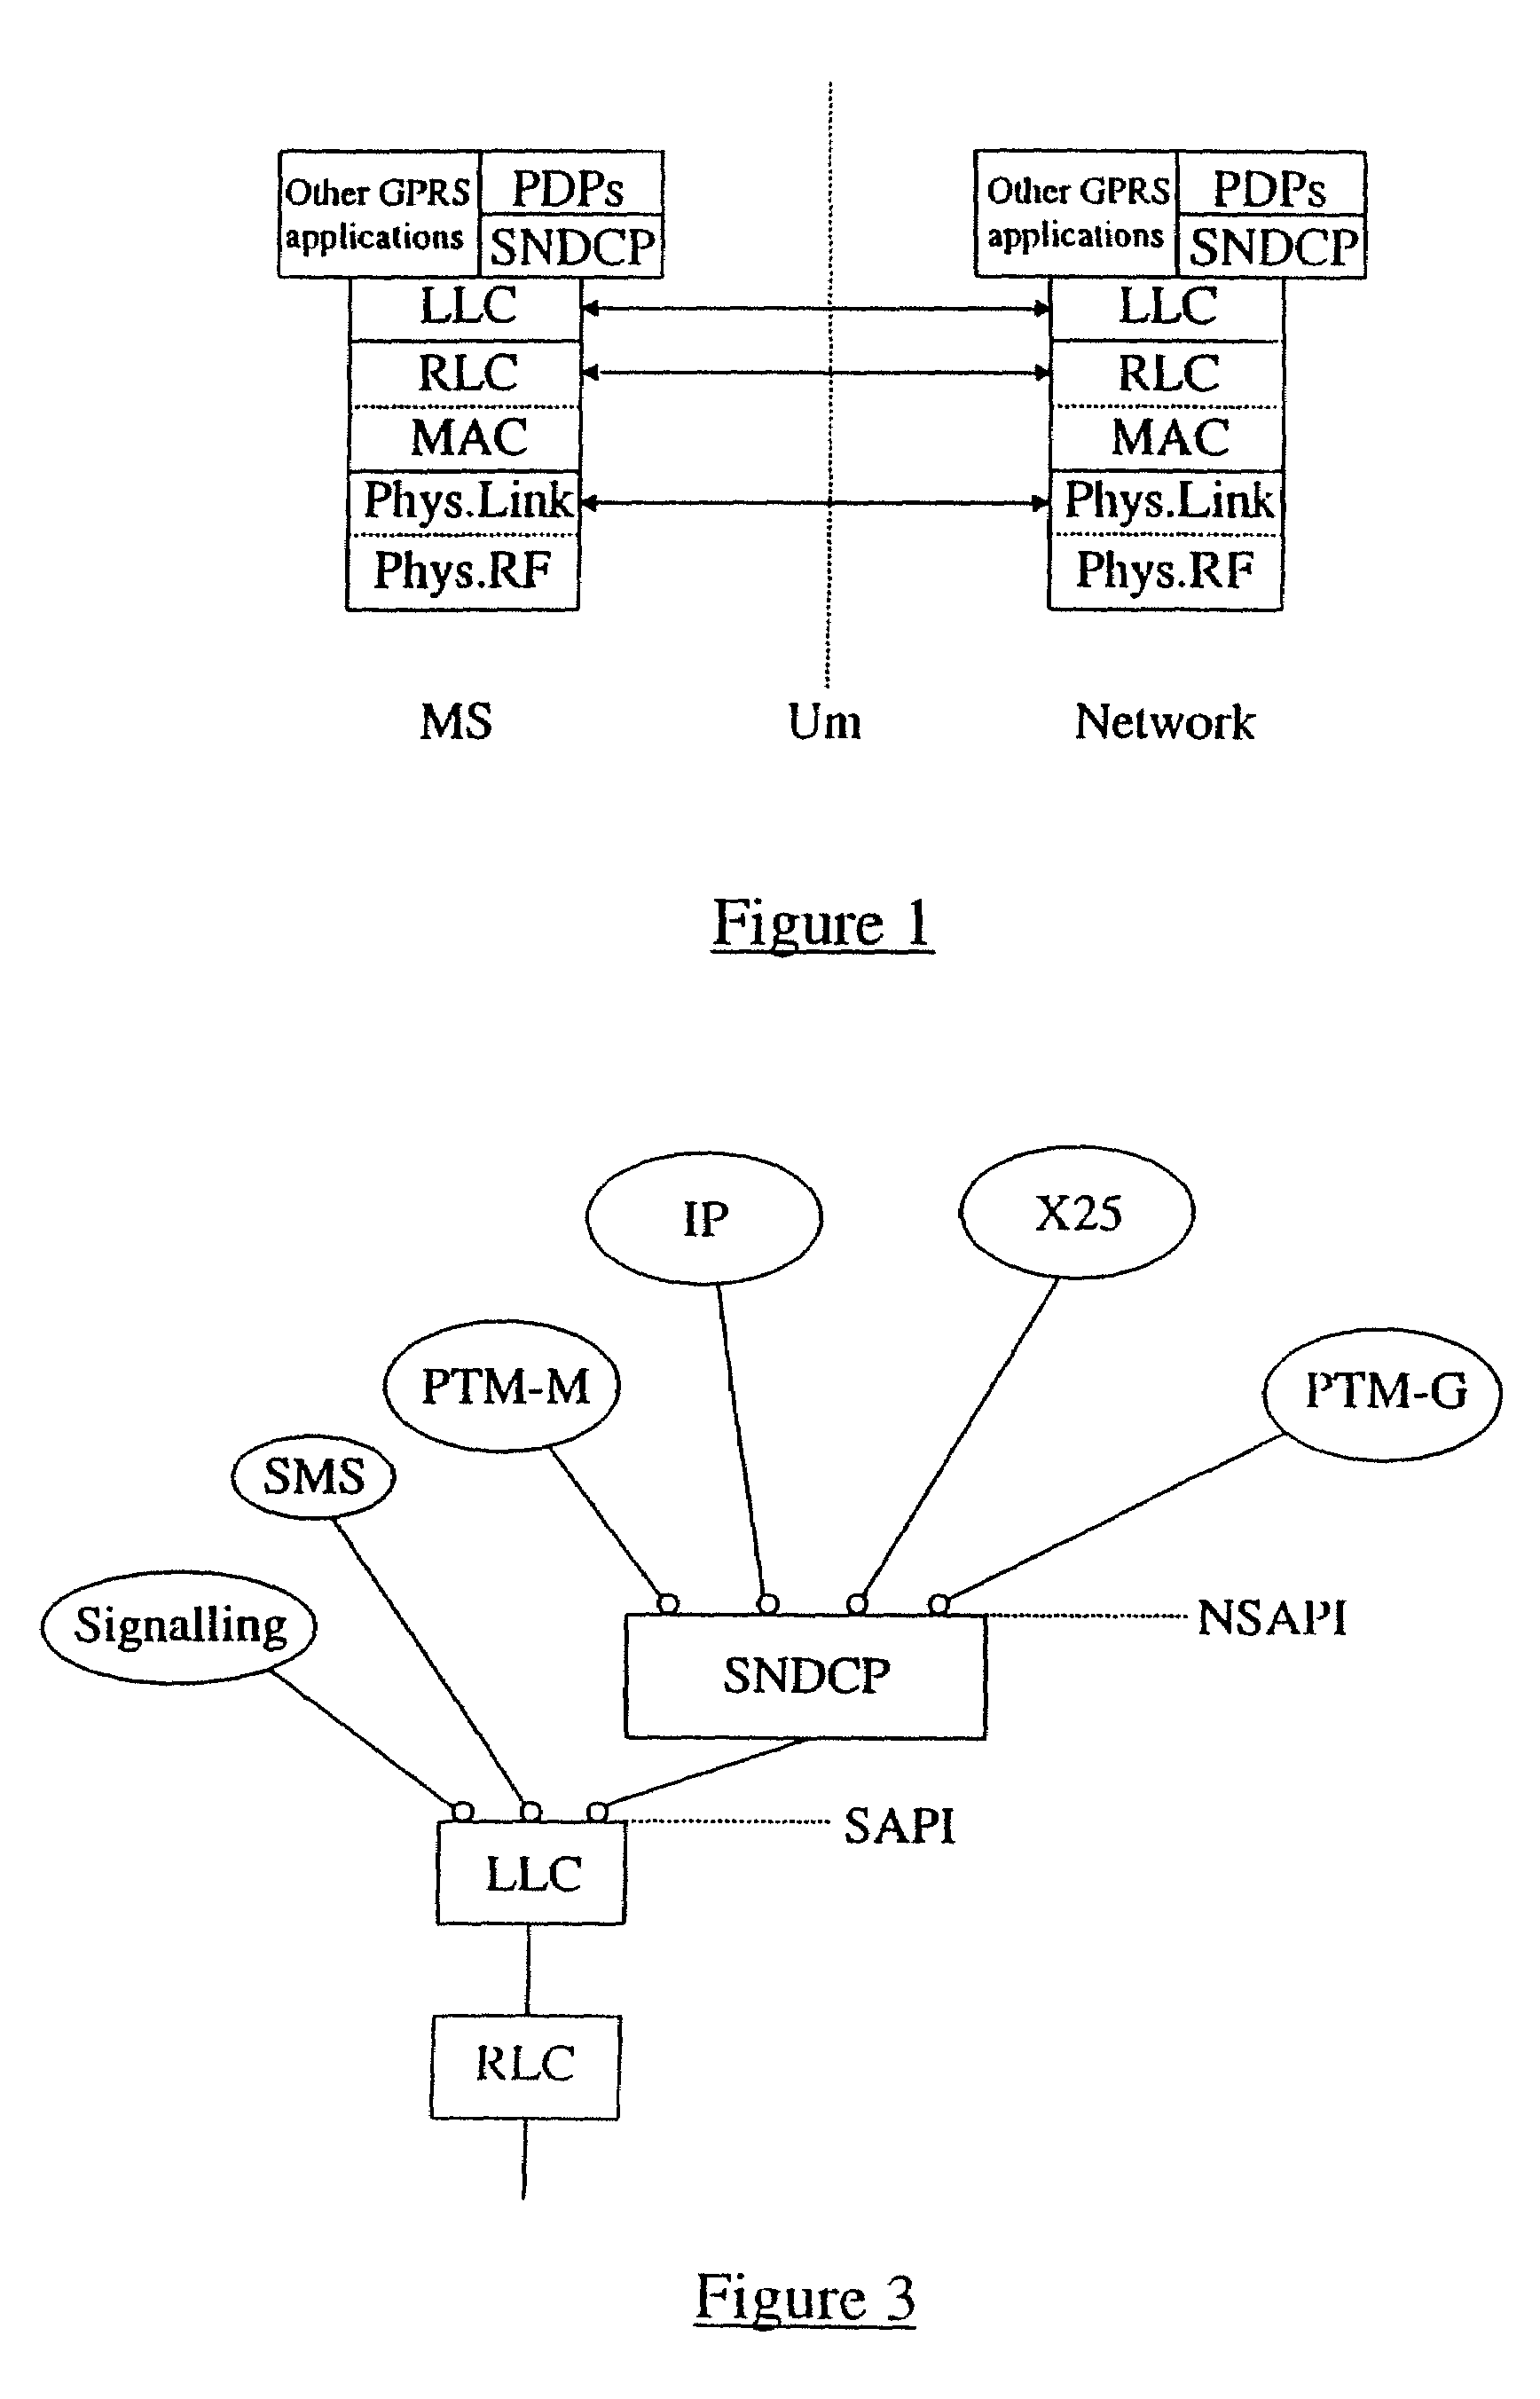 Point-to-multipoint mobile radio transmission